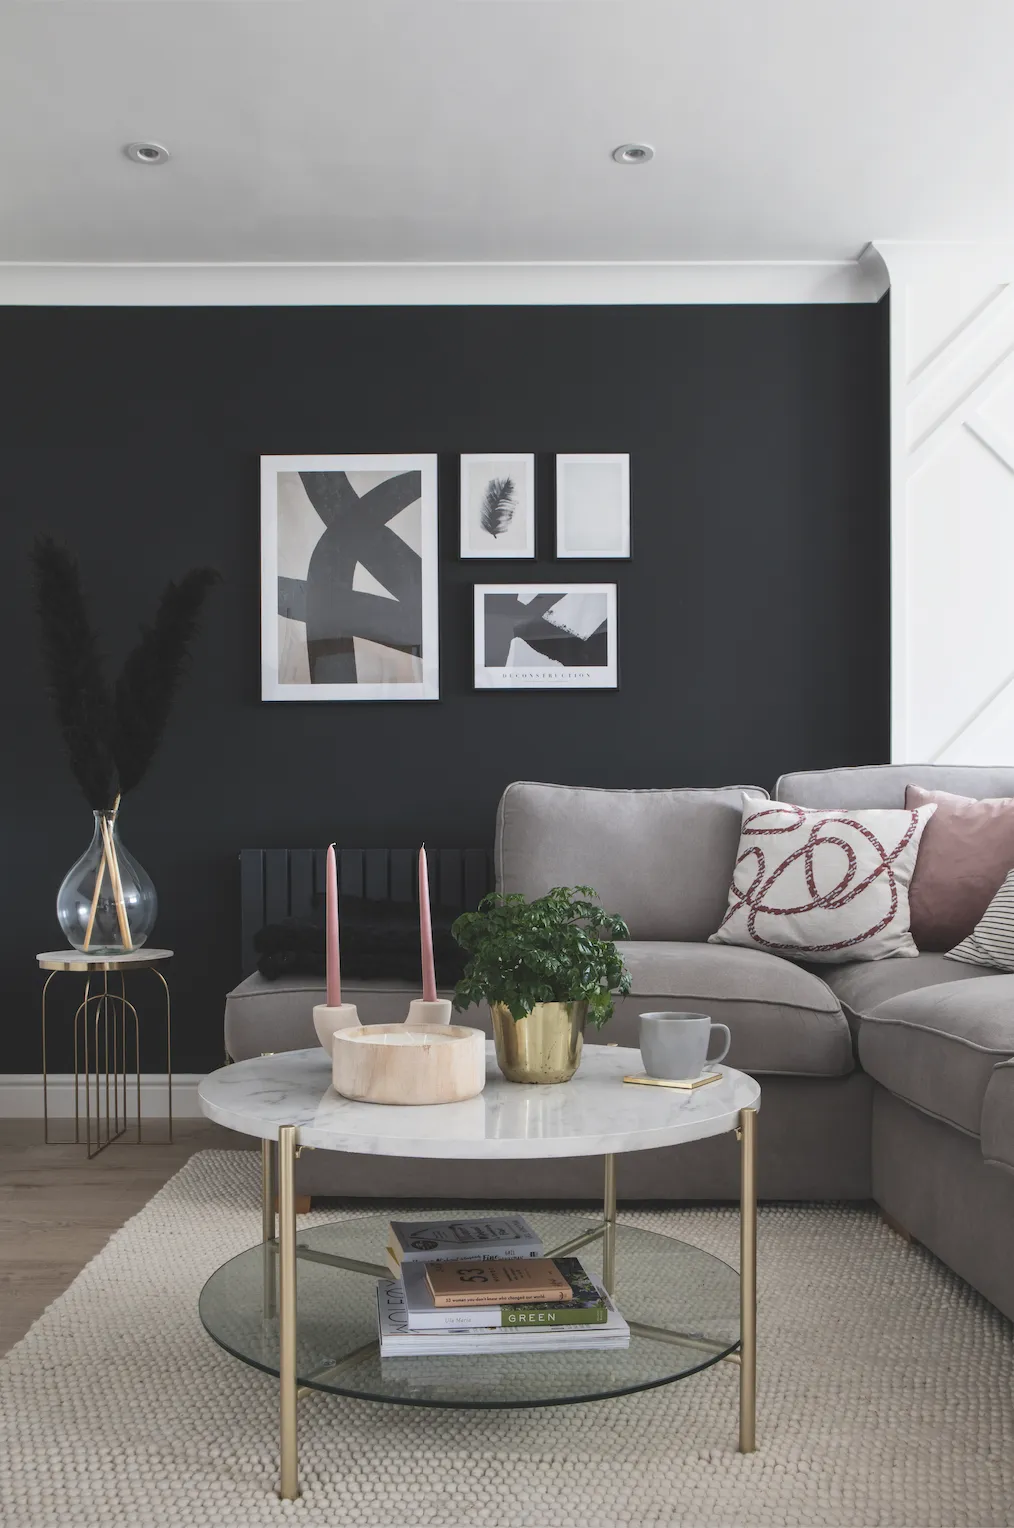 Becca has echoed her geometric wall panel with abstract lines and curves on cushions, accessories and prints and matched the marble-effect kitchen worktop with a sleek coffee table to tie it all together